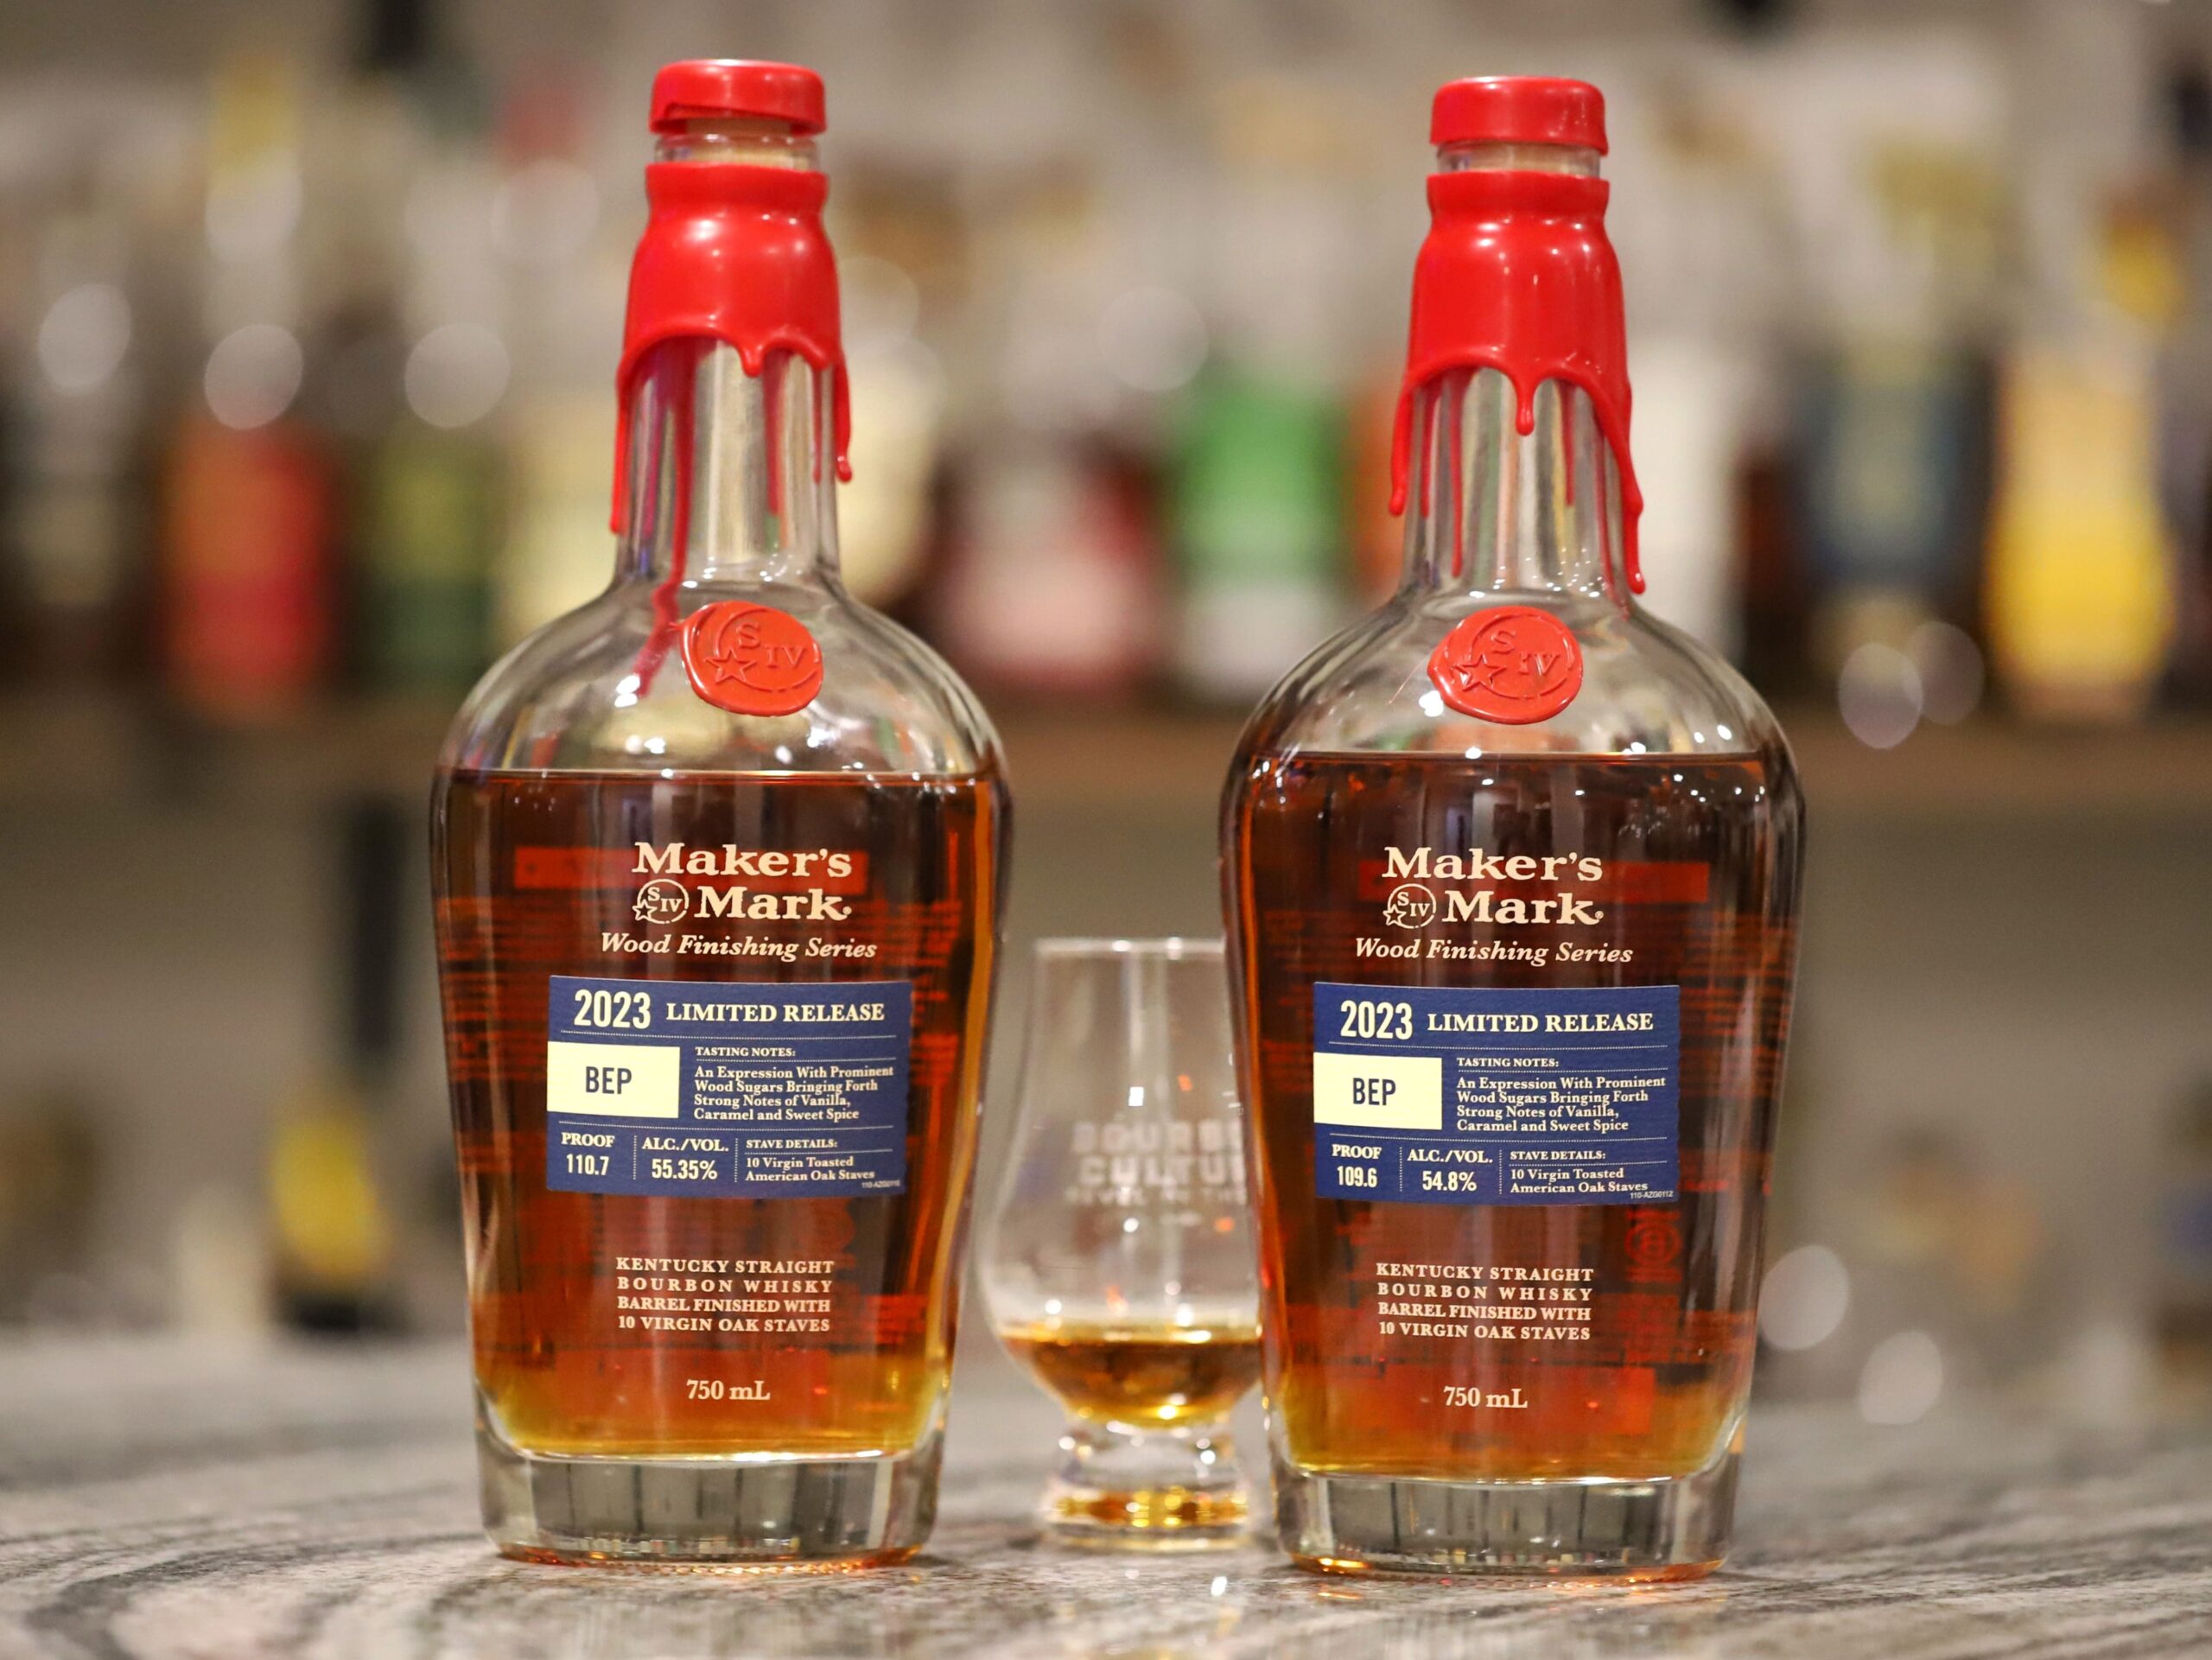 Maker’s Mark Wood Finishing Series 2023 Limited Release: BEP Review